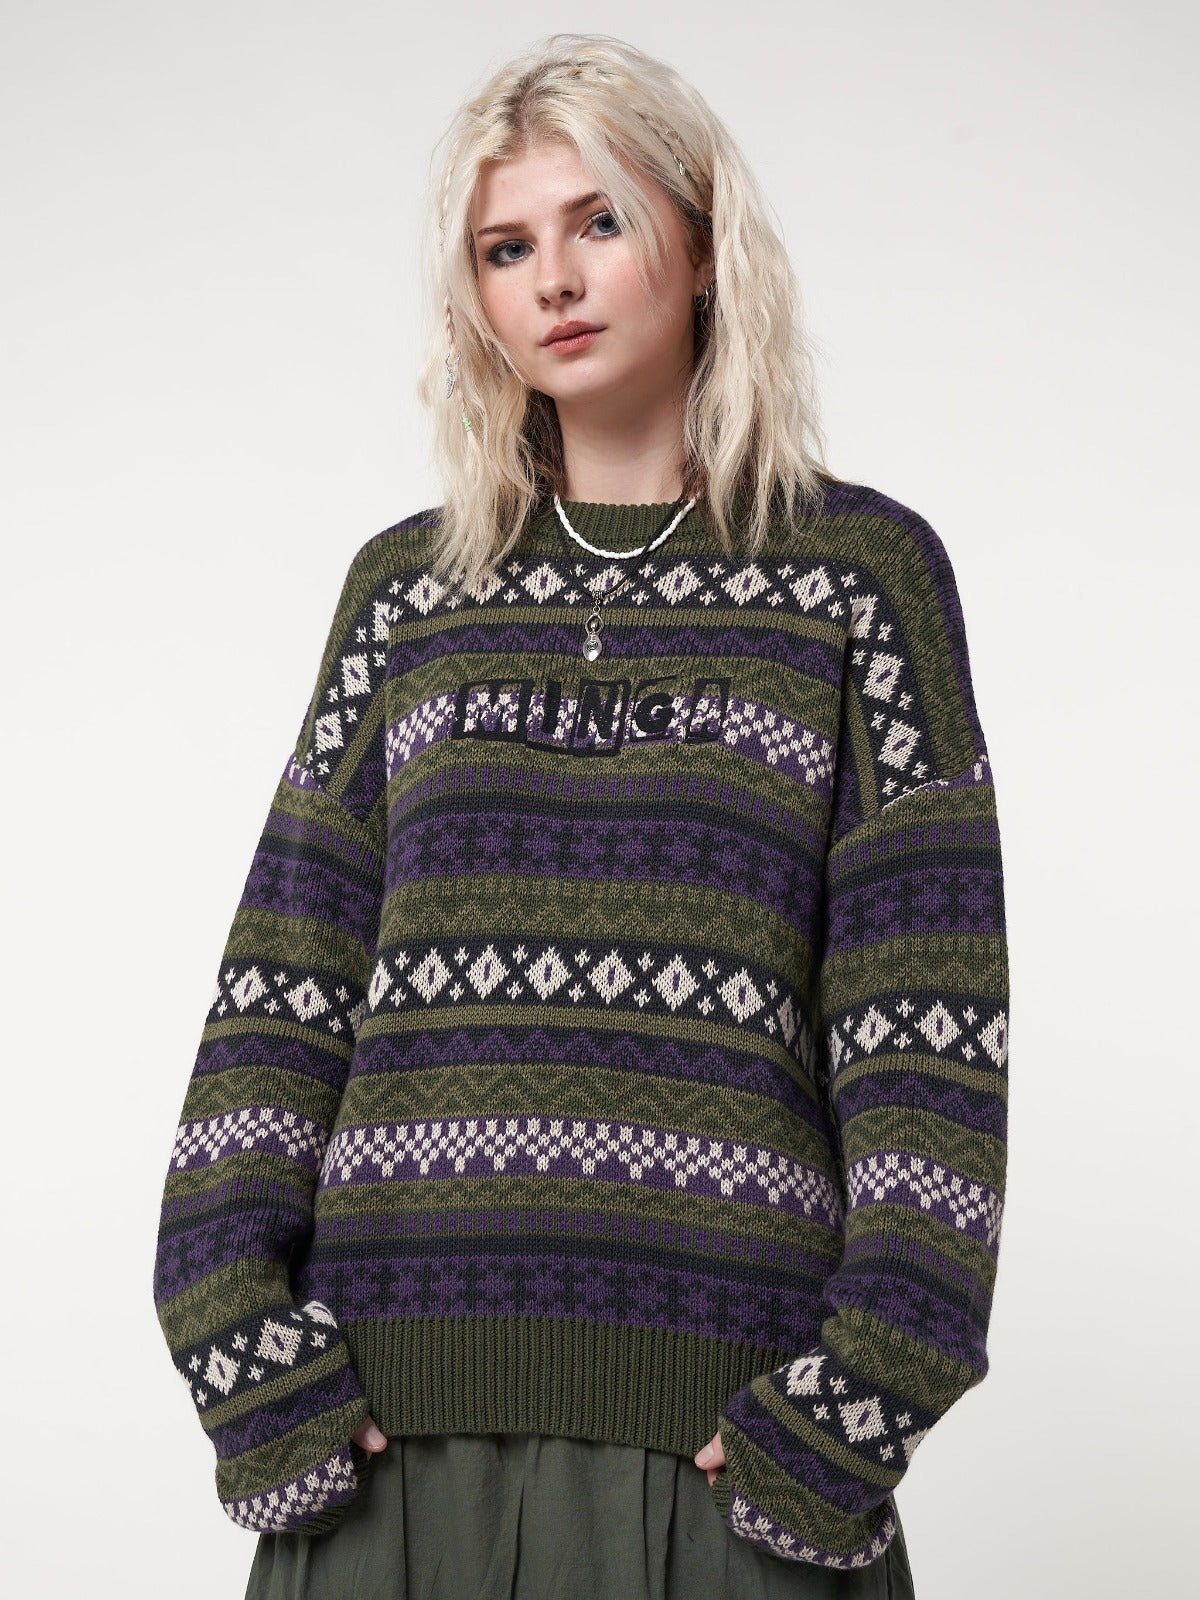 Jacquard knit jumper in green and purple with thumbhole cuffs